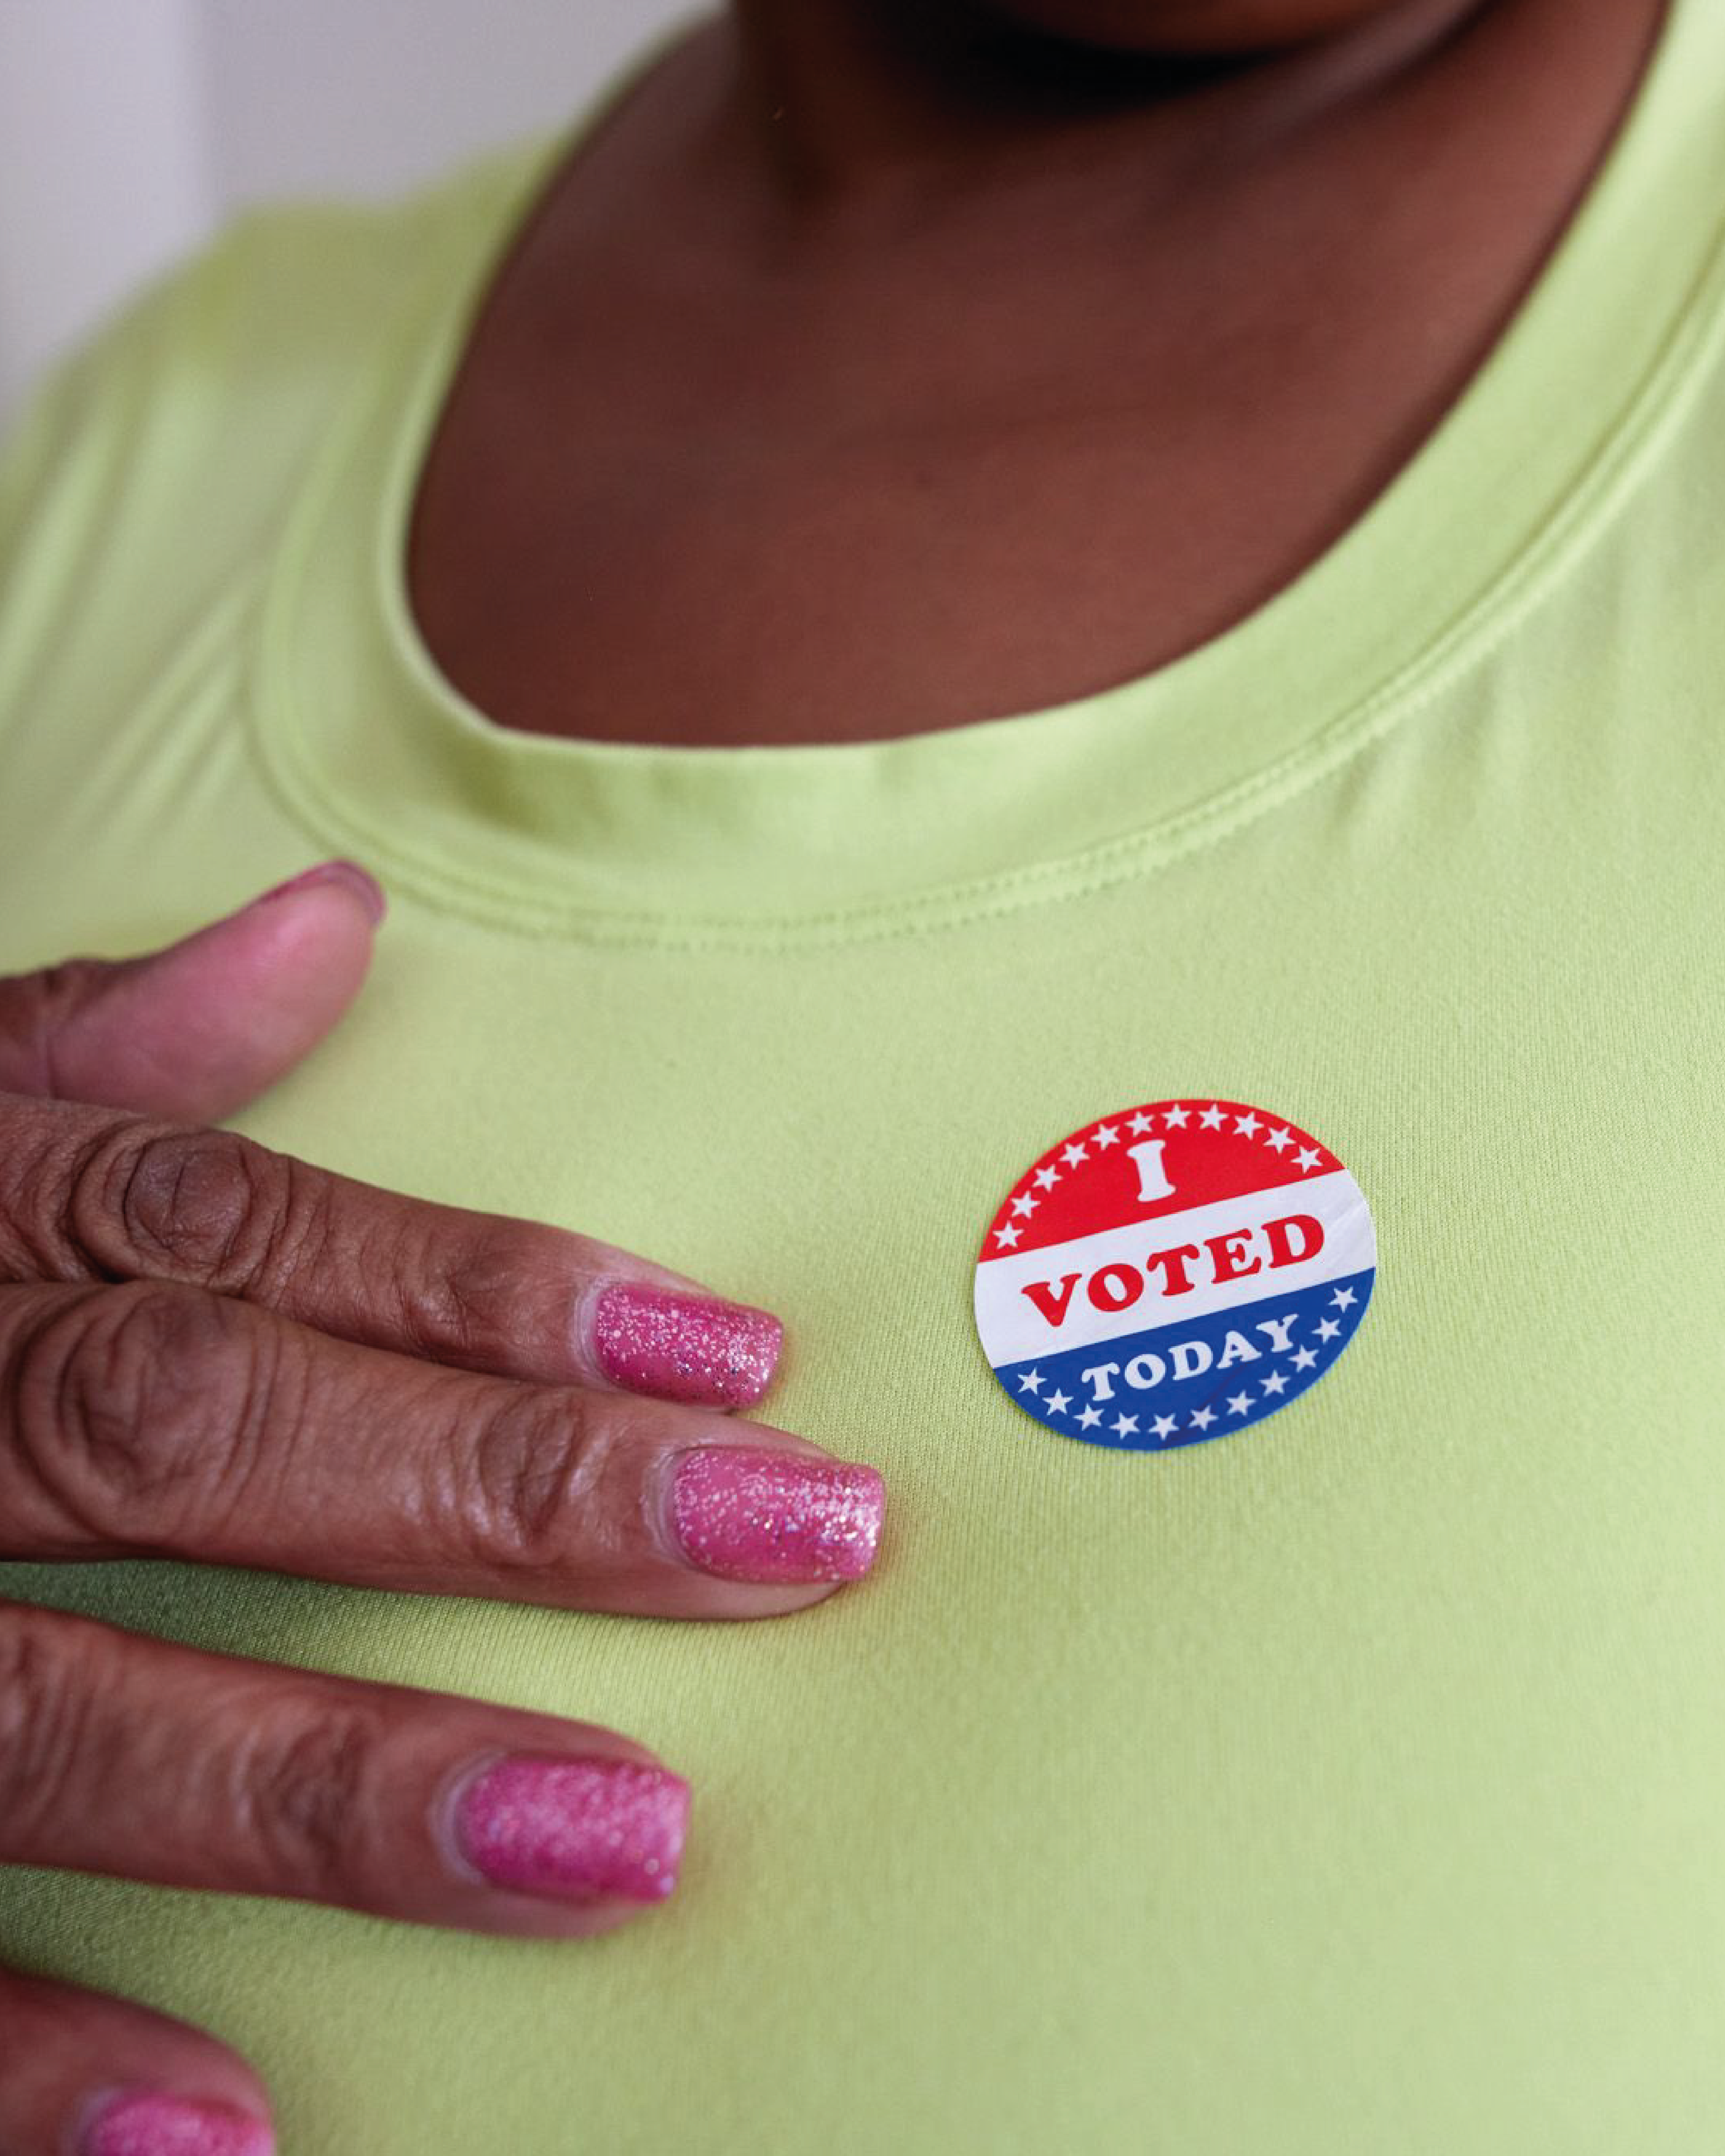 A close-up of an "I voted today" sticker on a lime green t-shirt